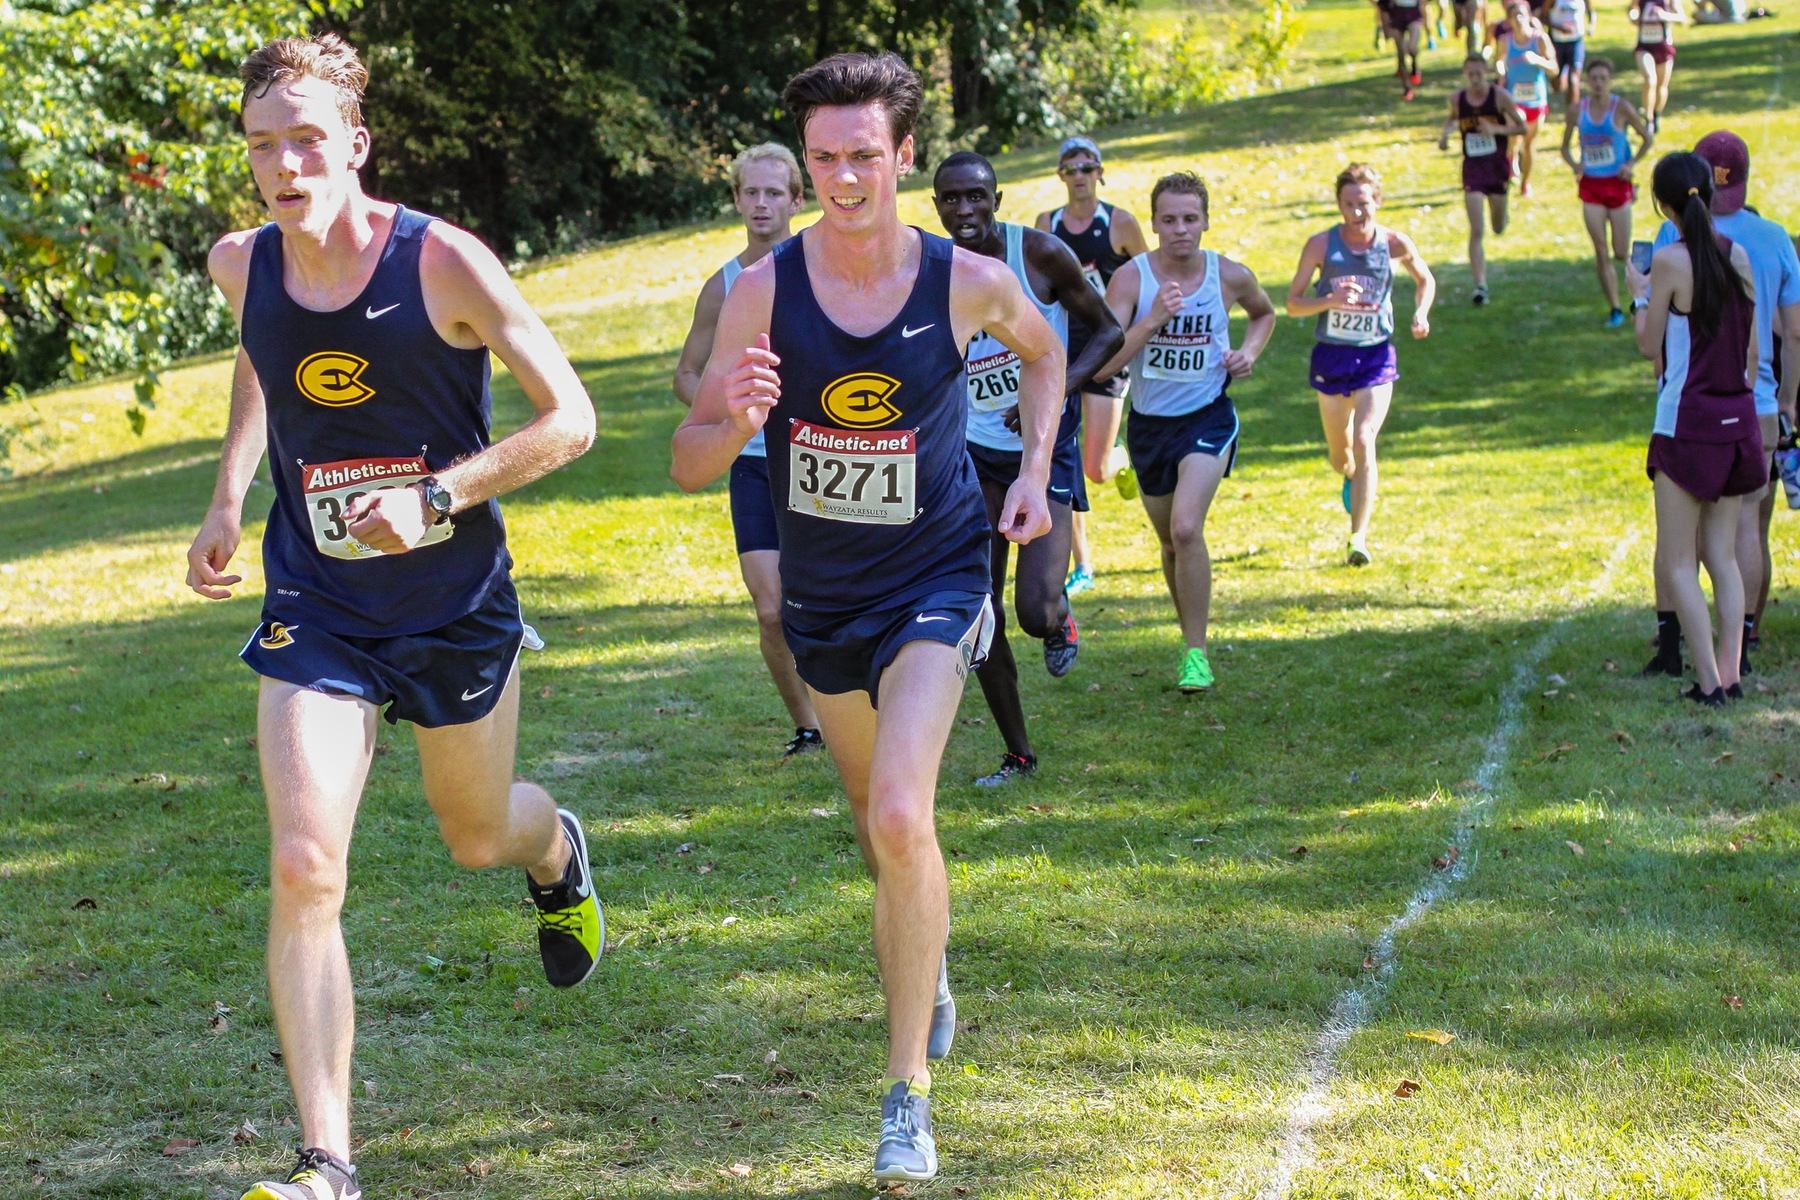 Treacy finishes 2nd overall, Blugolds 4th as a team at Augsburg Invite